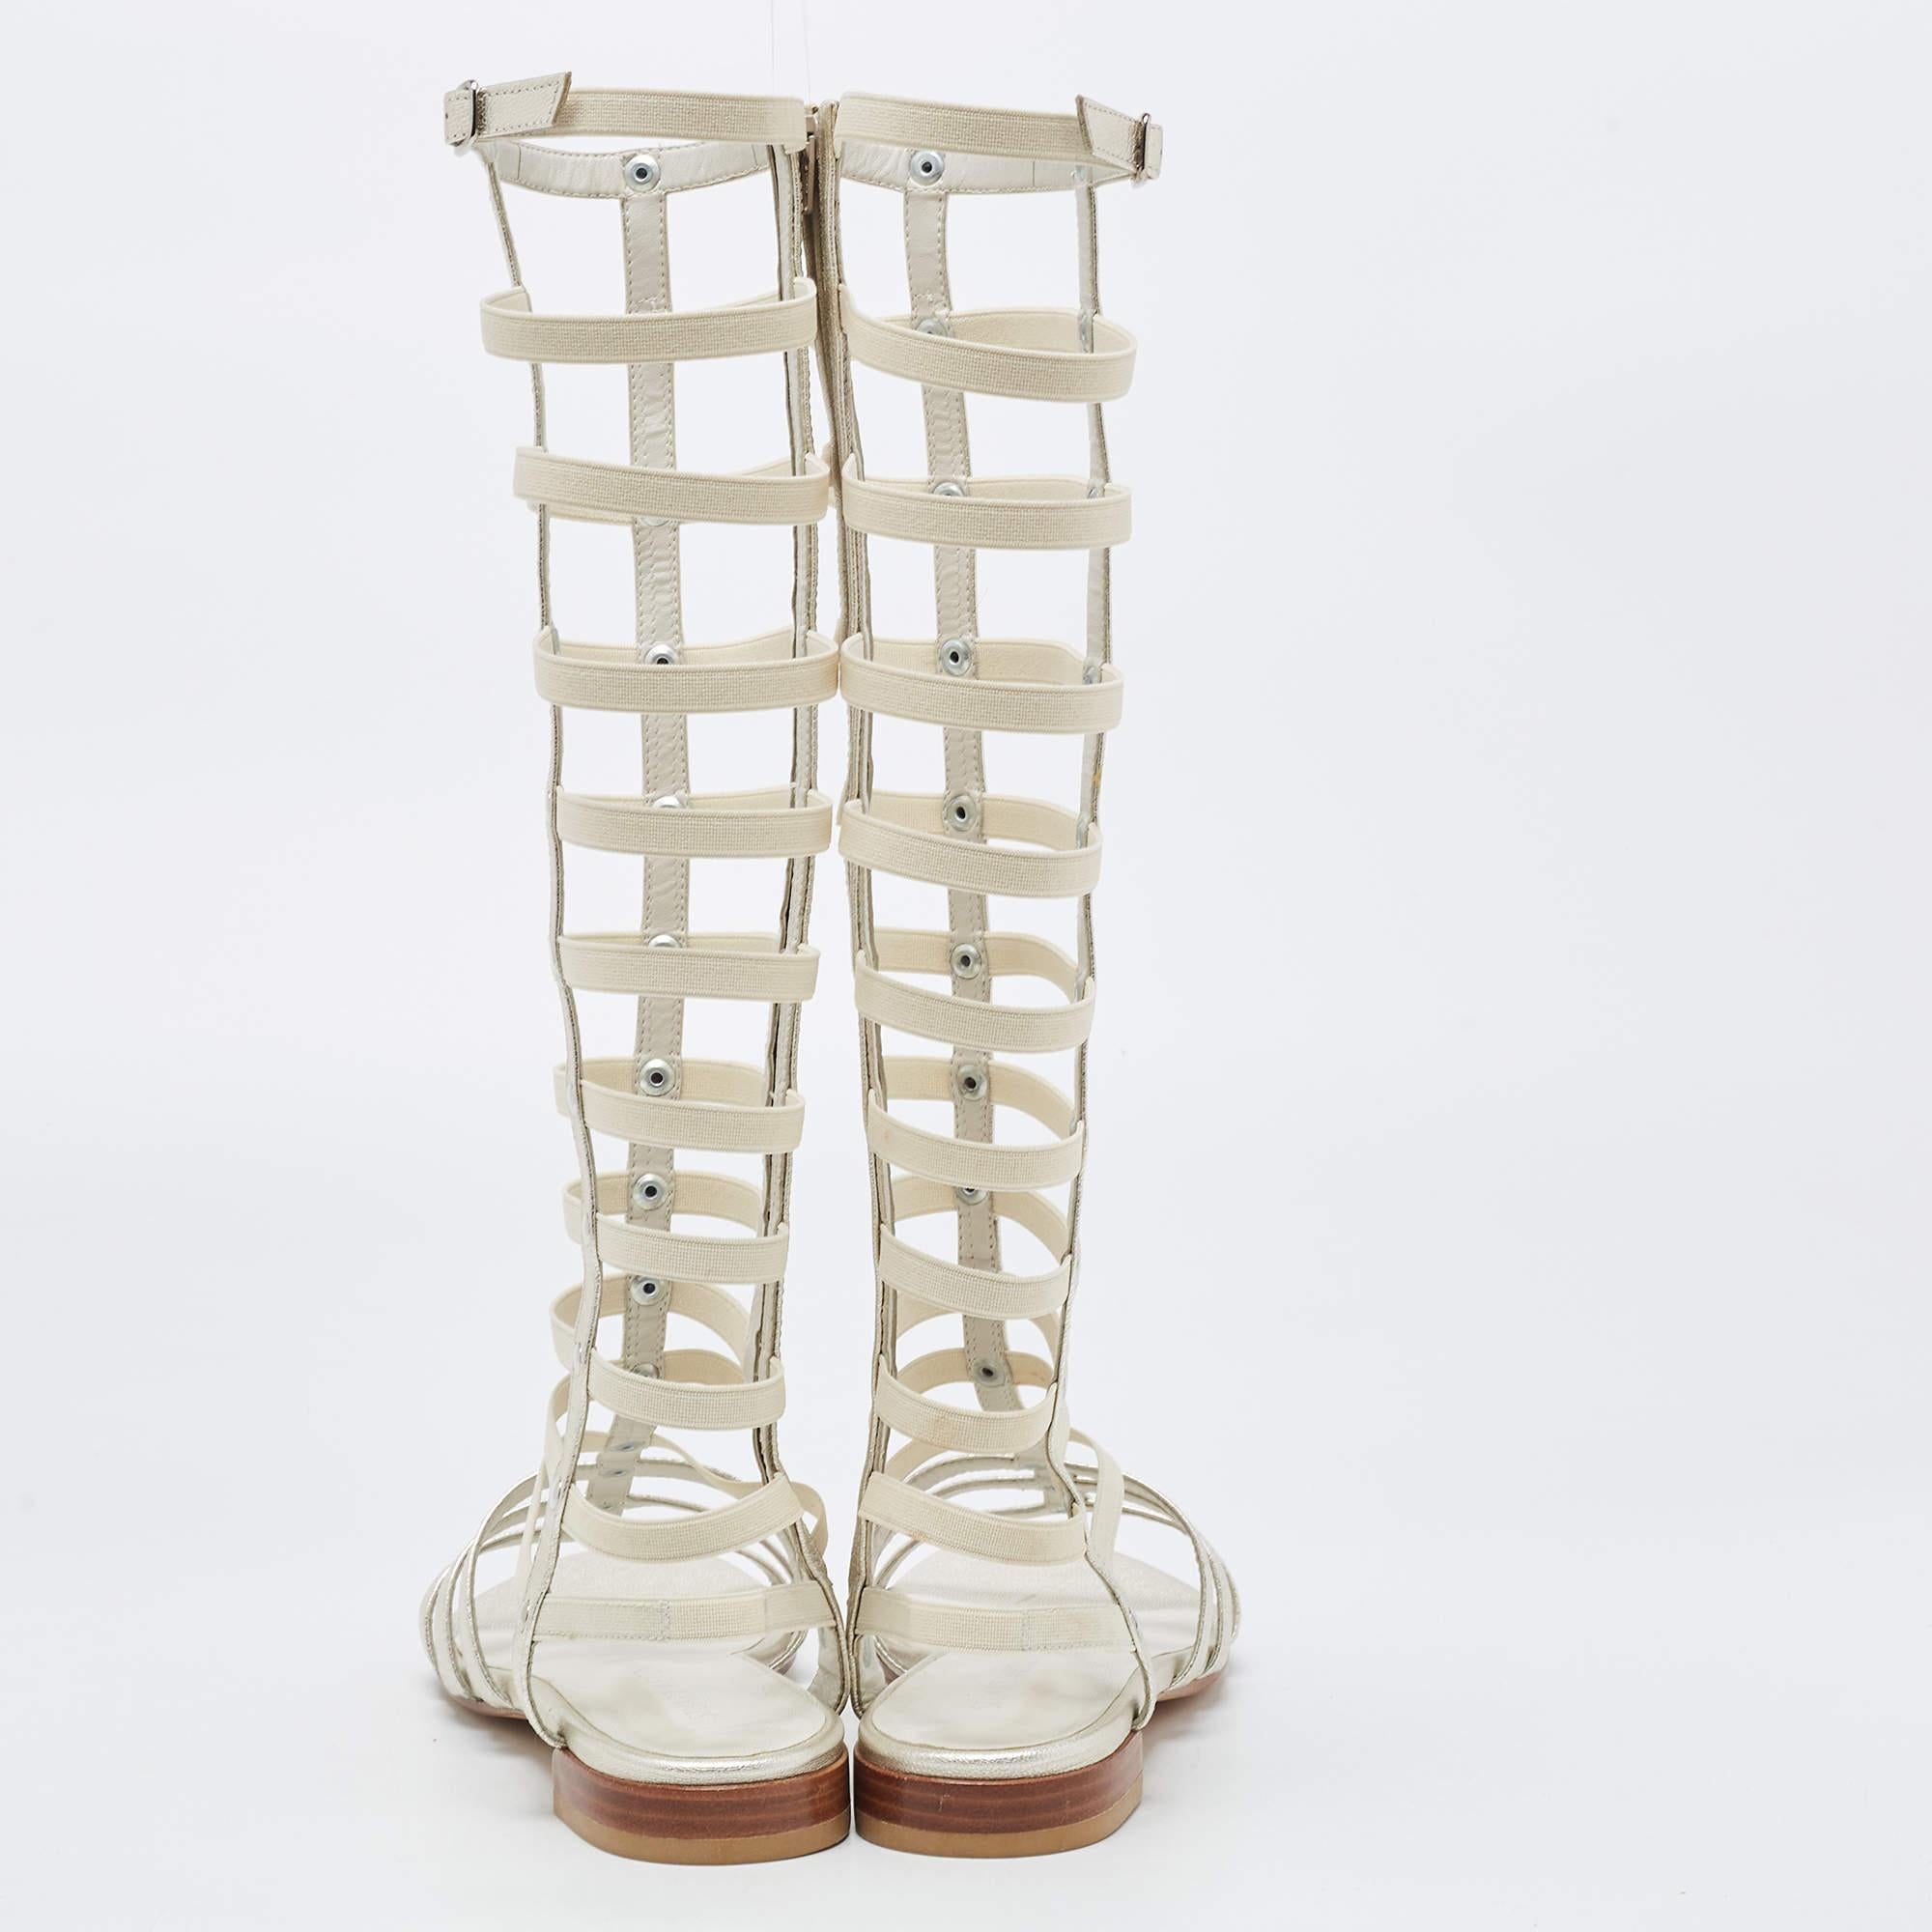 Stuart Weitzman Silver Leather And Elastic Gladiator Flat Sandals Size 36 In Excellent Condition For Sale In Dubai, Al Qouz 2